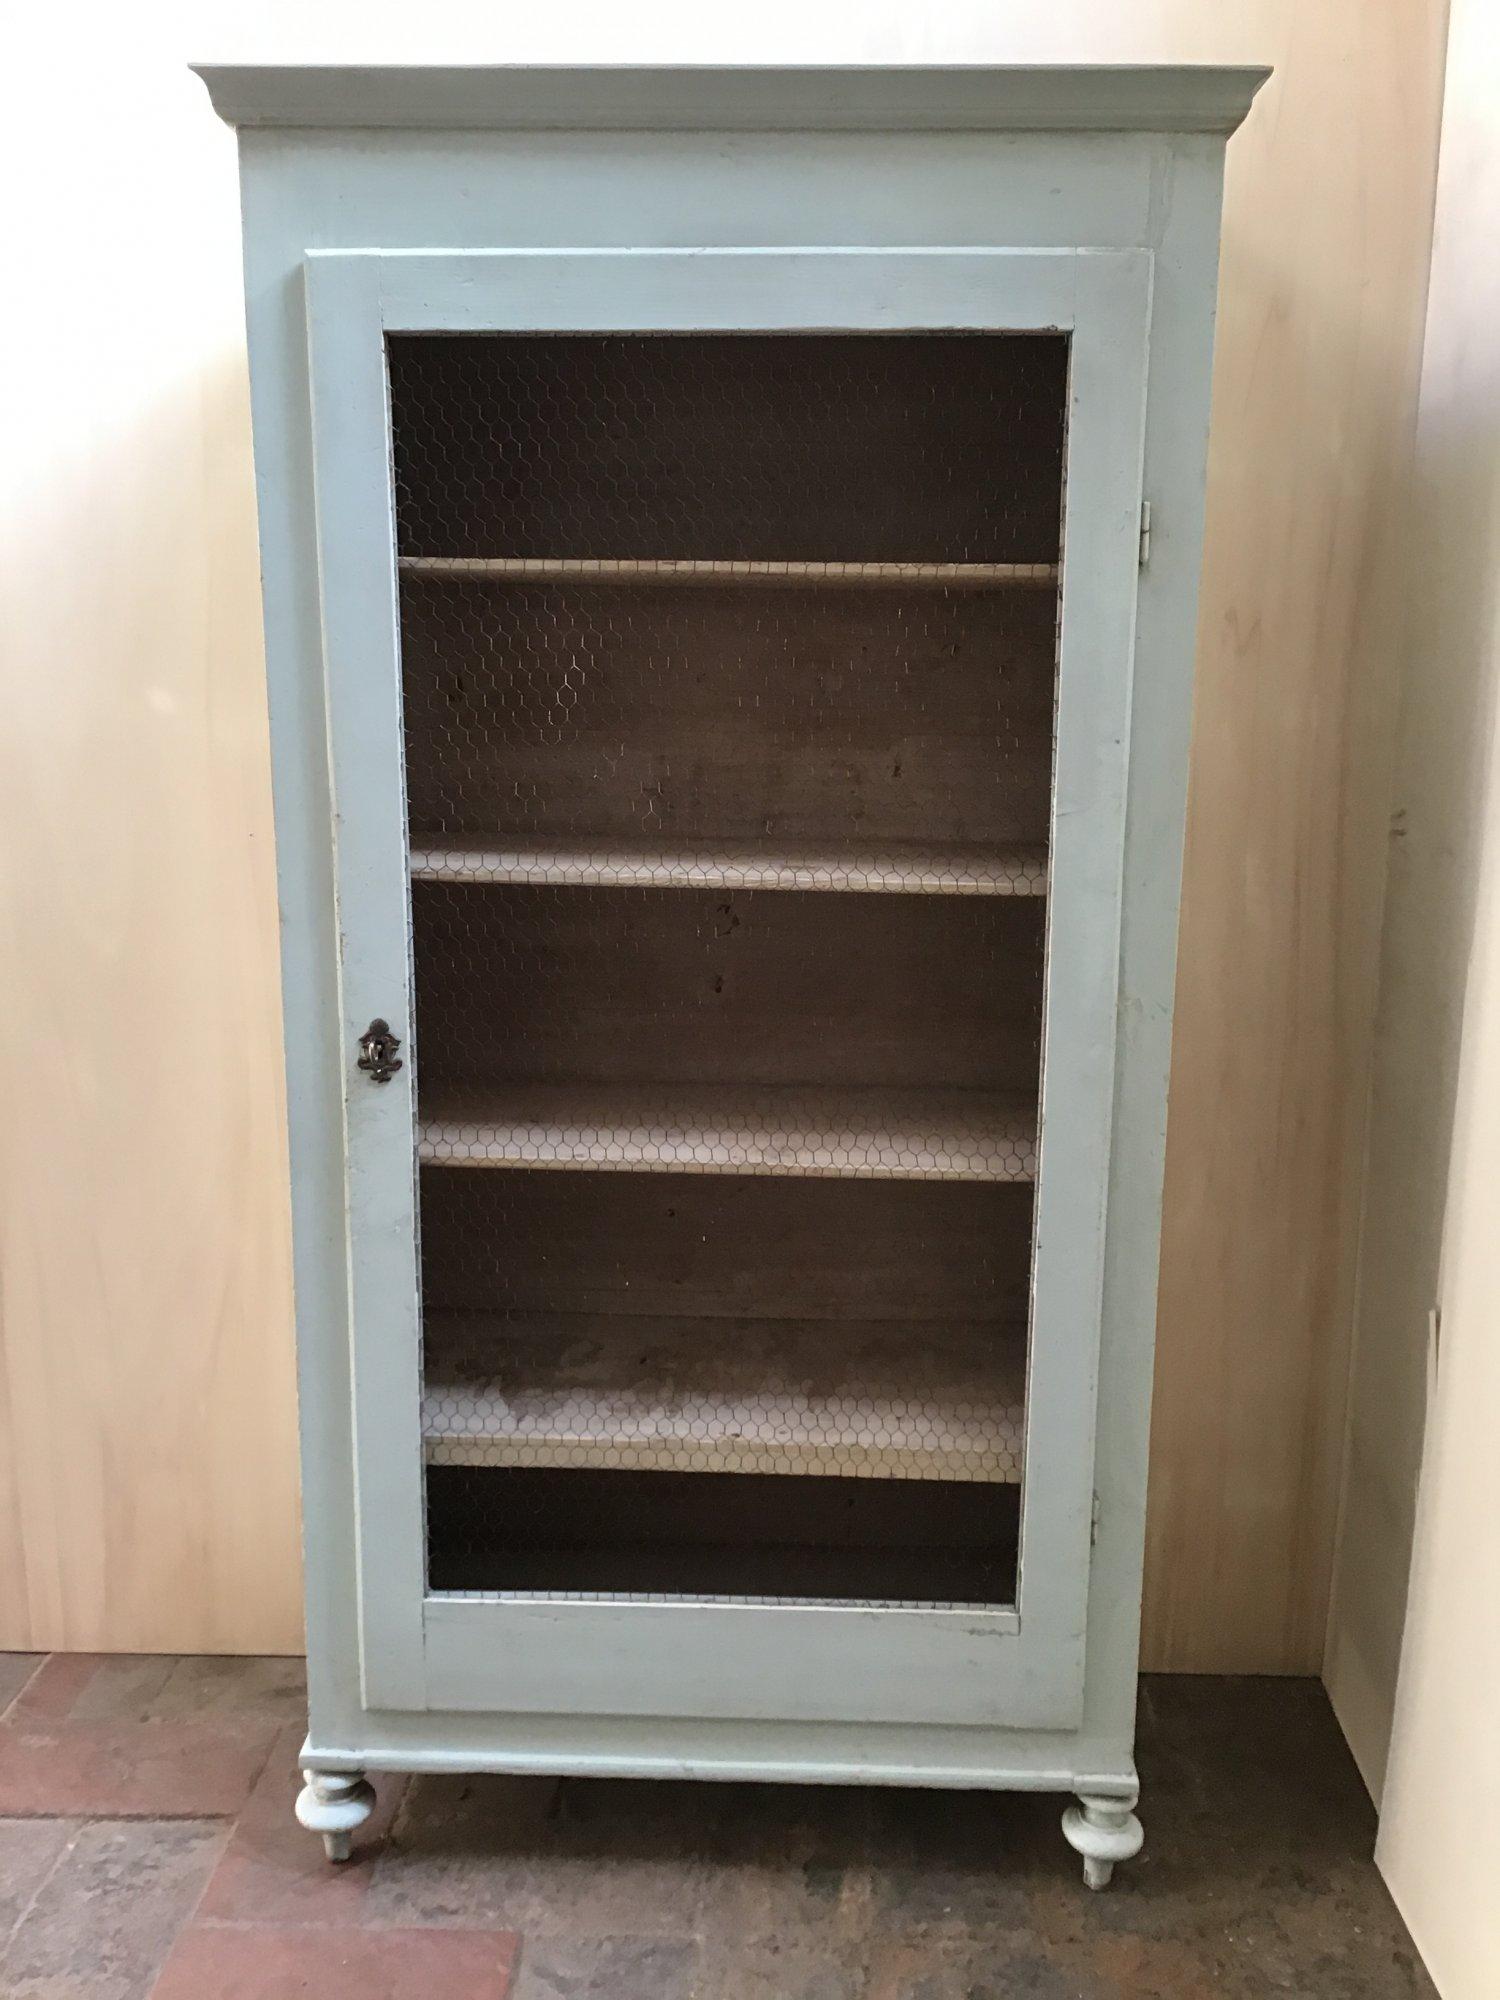 Victorian 19th Century Italian Painted Wood Wardrobe with Shelves and Metal Mesh Door For Sale